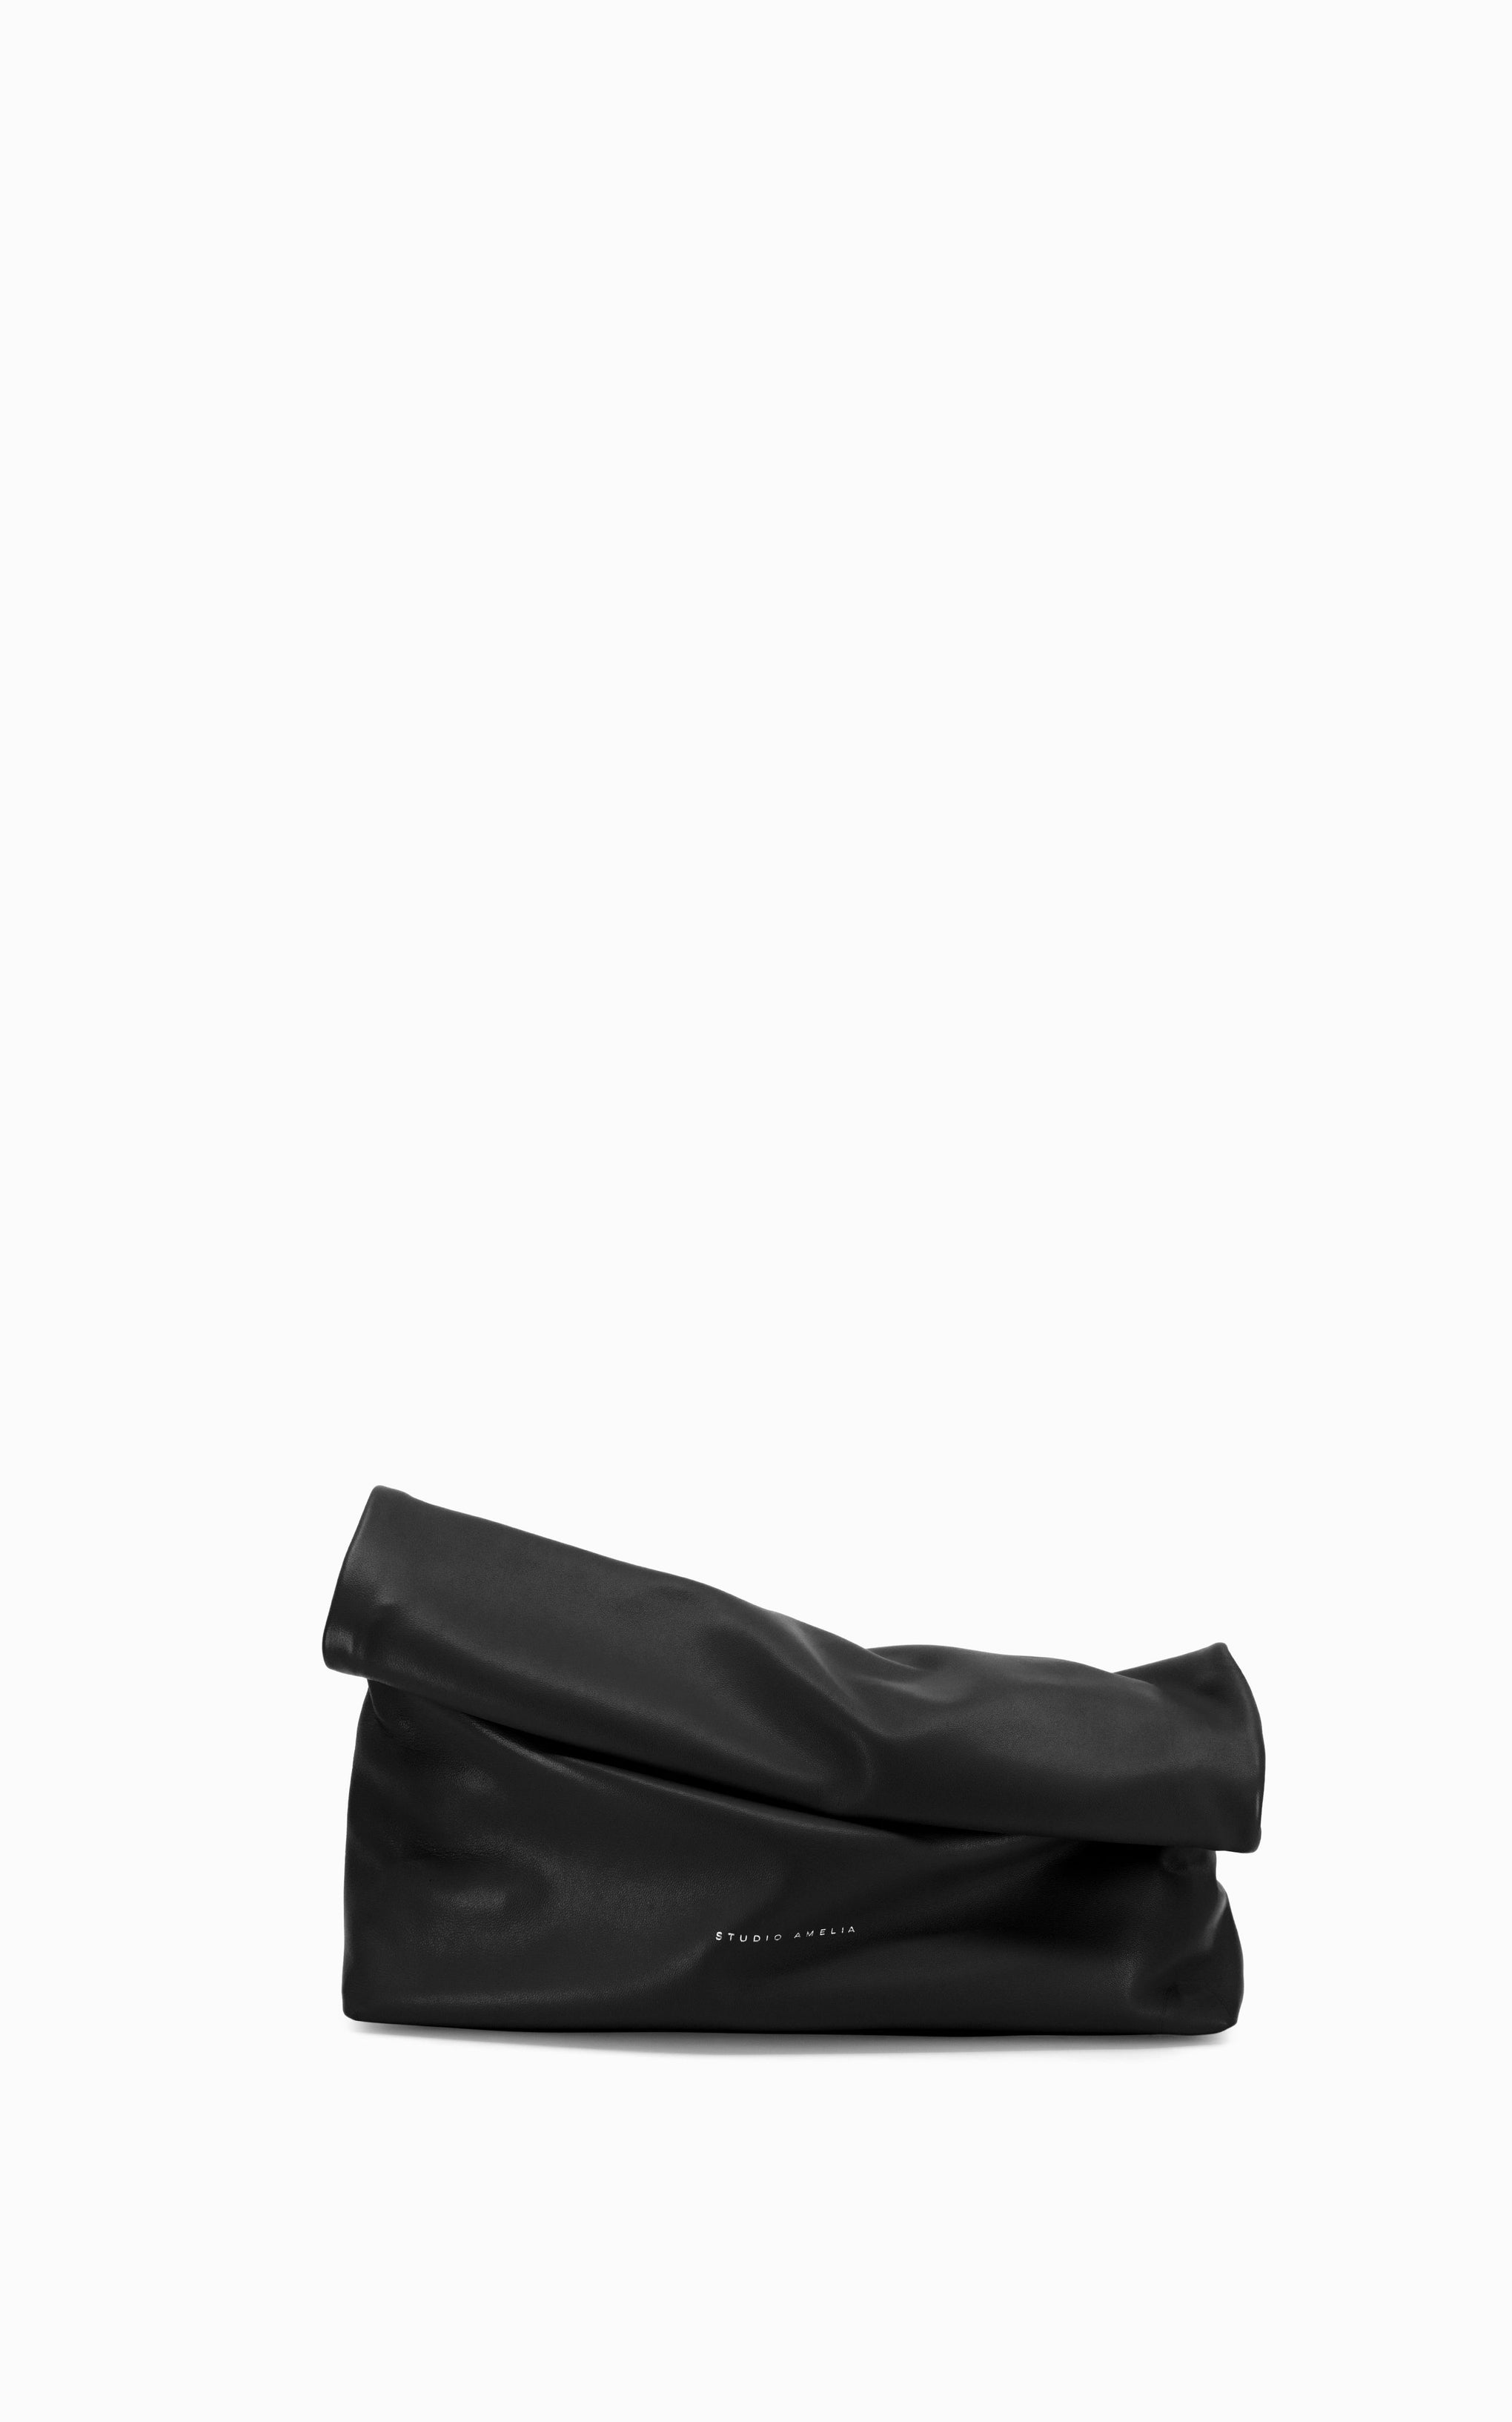 The Studio Amelia Pillow Clutch in Black available at The New Trend Australia